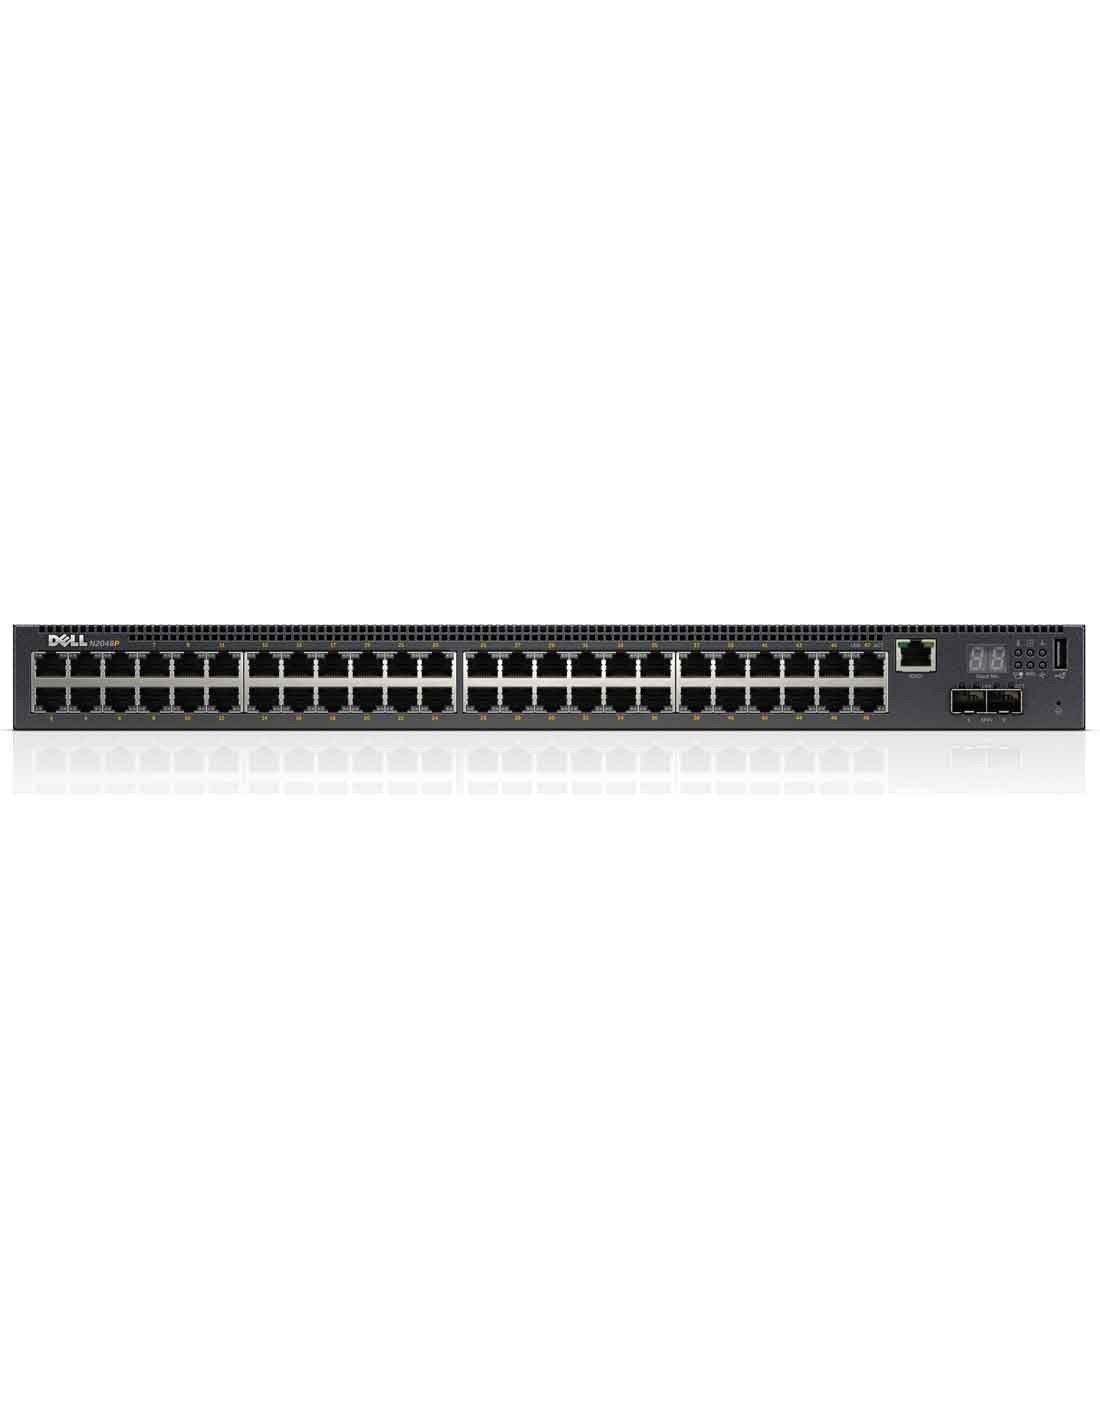 Dell Networking N2048P Switch at a cheap price and fast free delivery in Dubai UAE